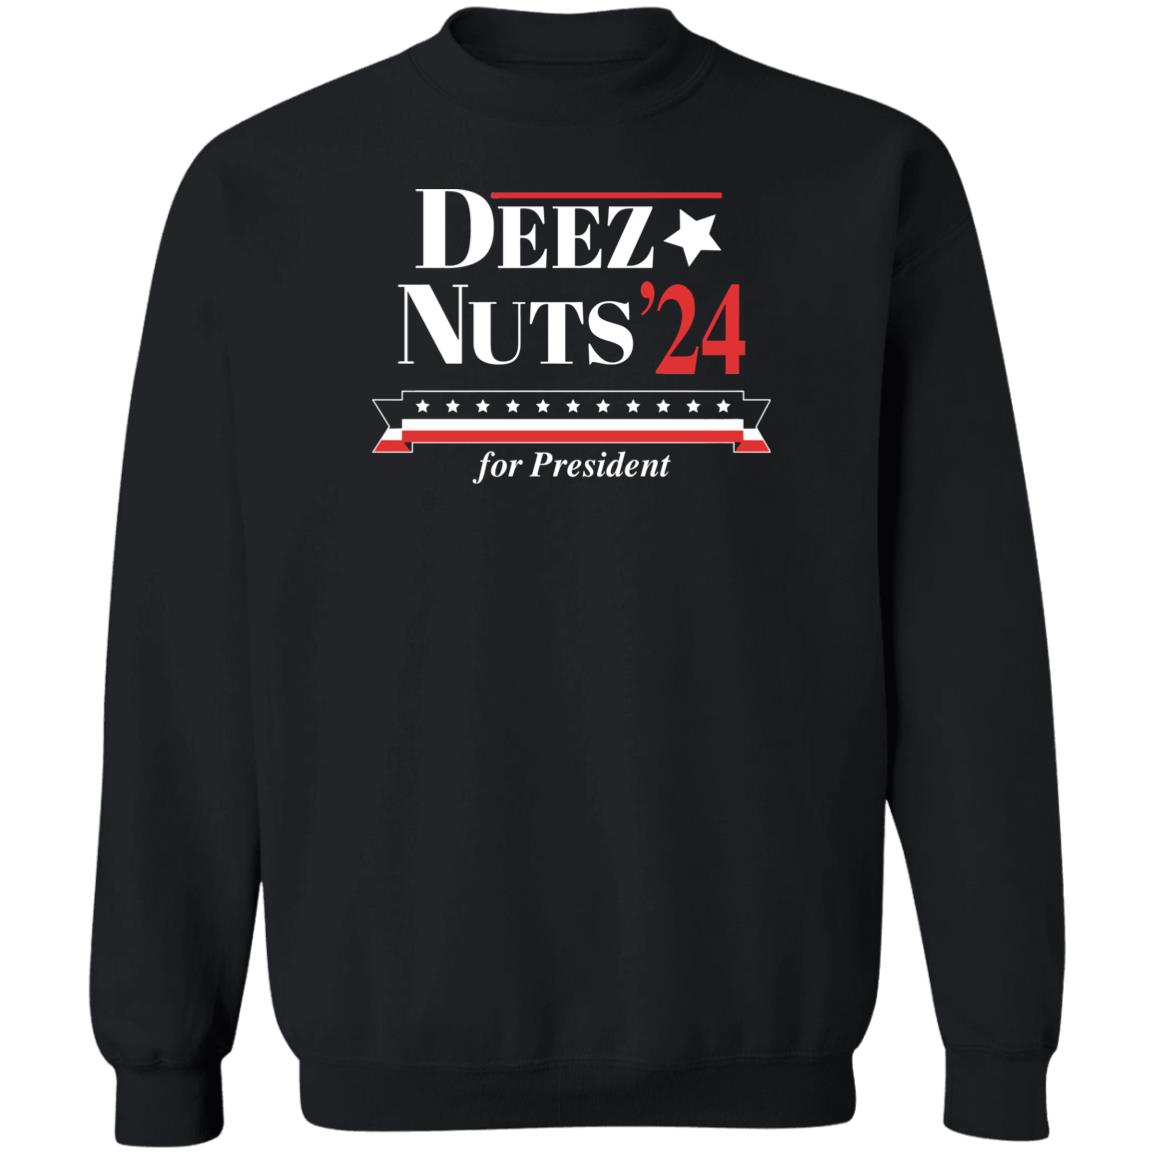 Deez Nuts’24 For President Shirt 2